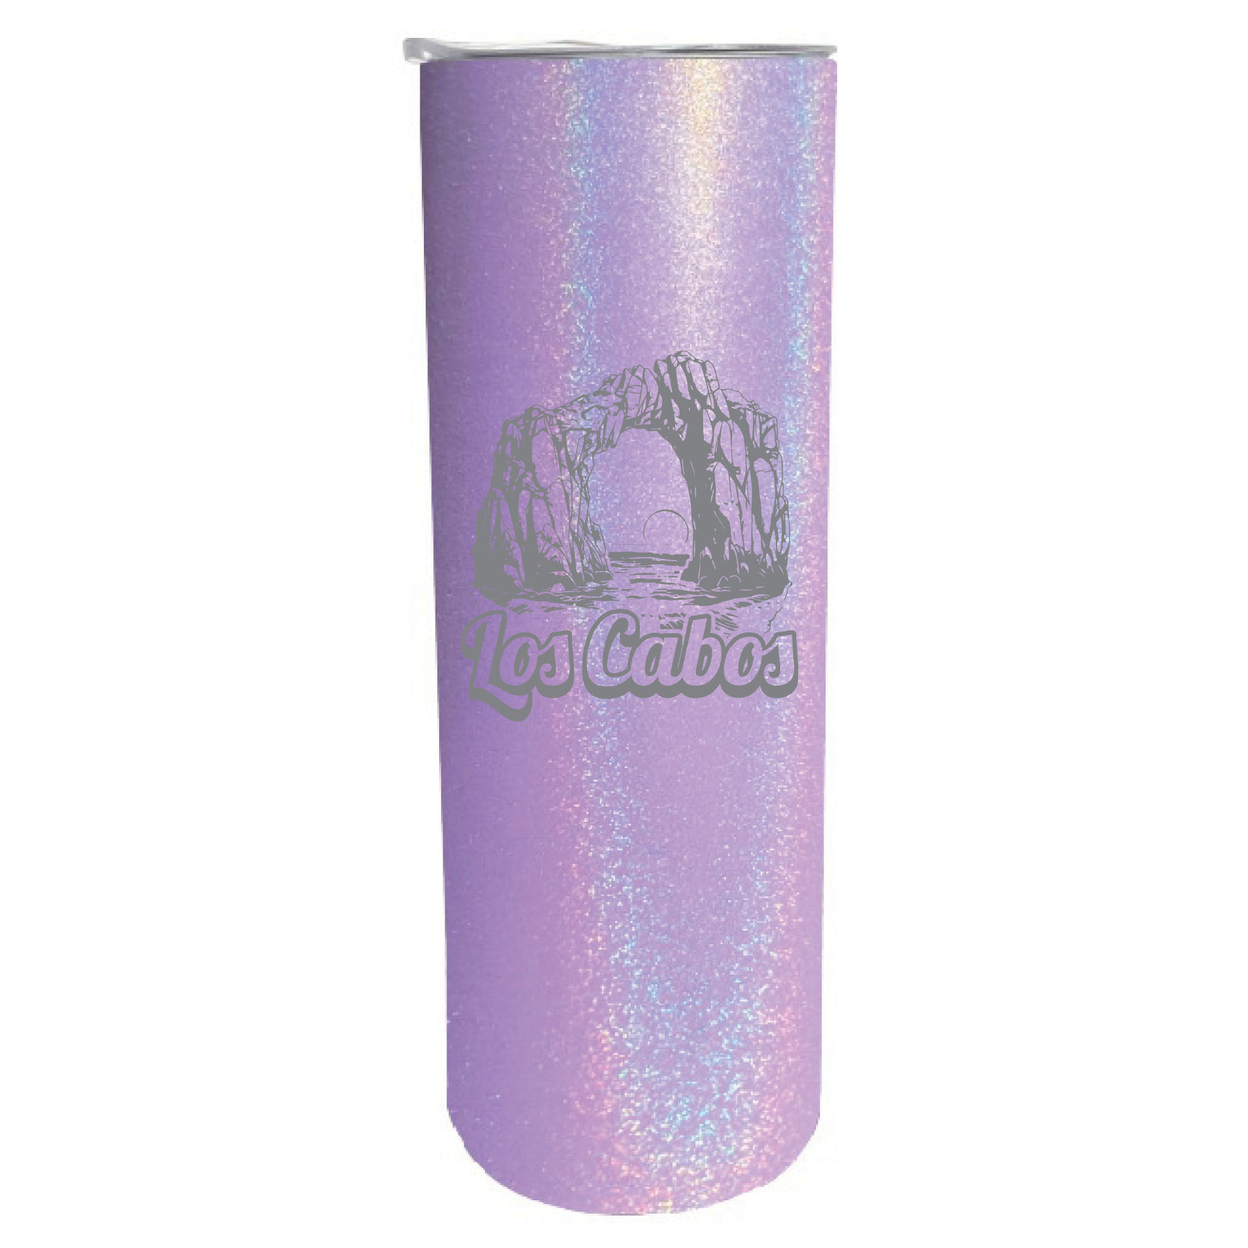 Los Cabos Mexico Souvenir 20 Oz Engraved Insulated Stainless Steel Skinny Tumbler - Seafoam,,2-Pack